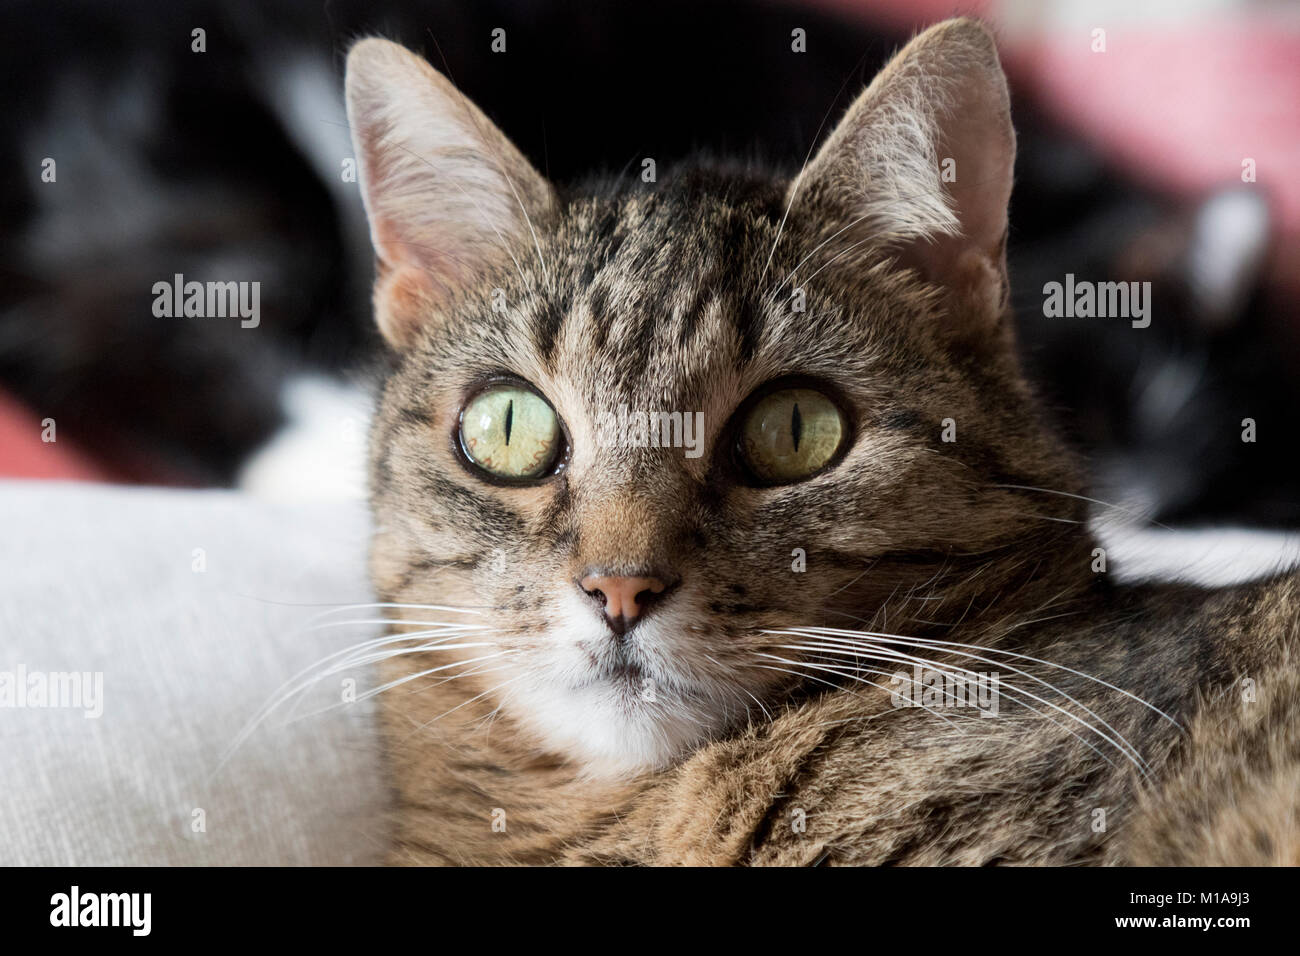 Tabby cat with pricked ears Stock Photo